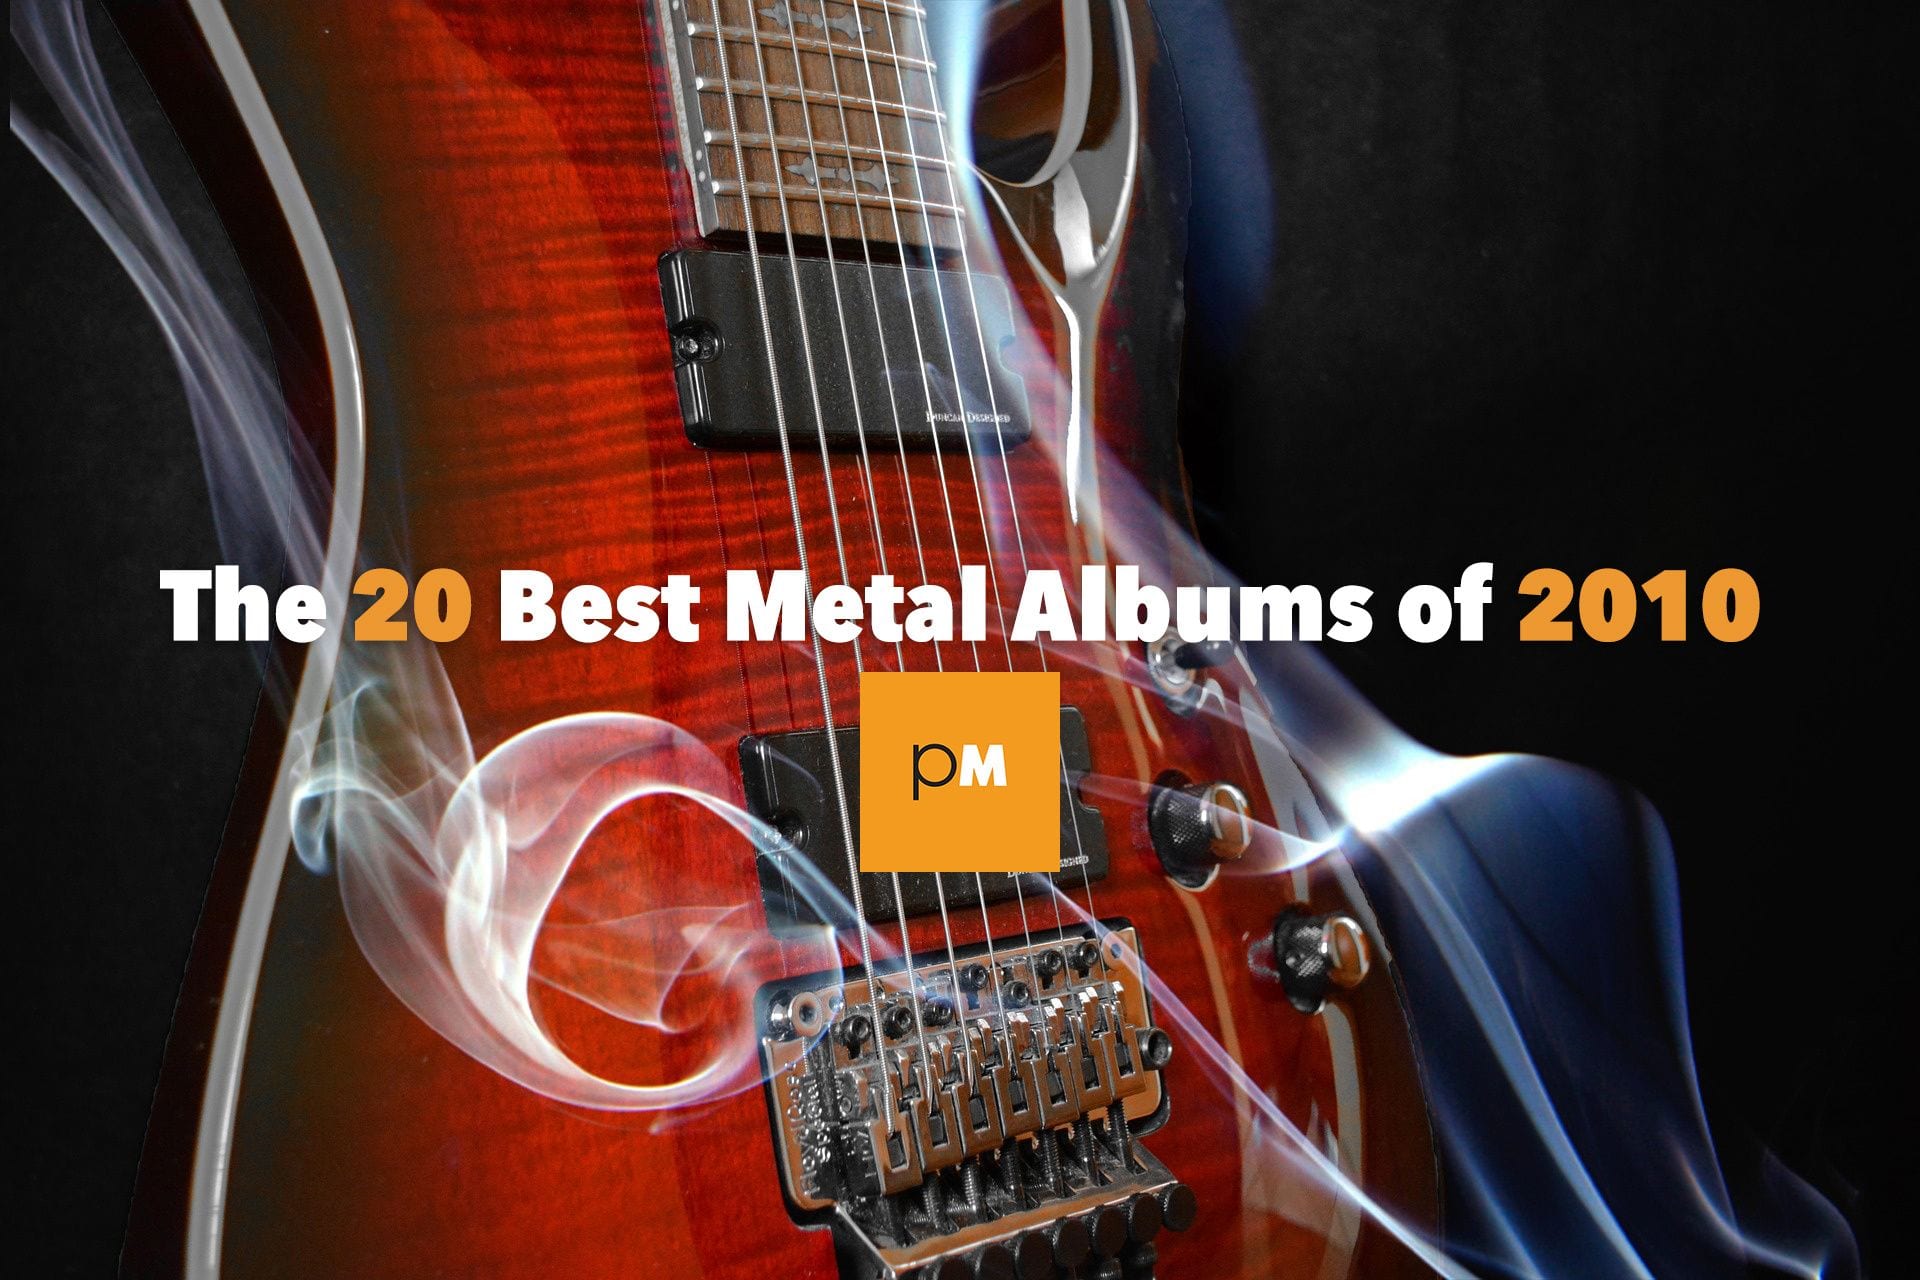 The 20 Best Metal Albums of 2010